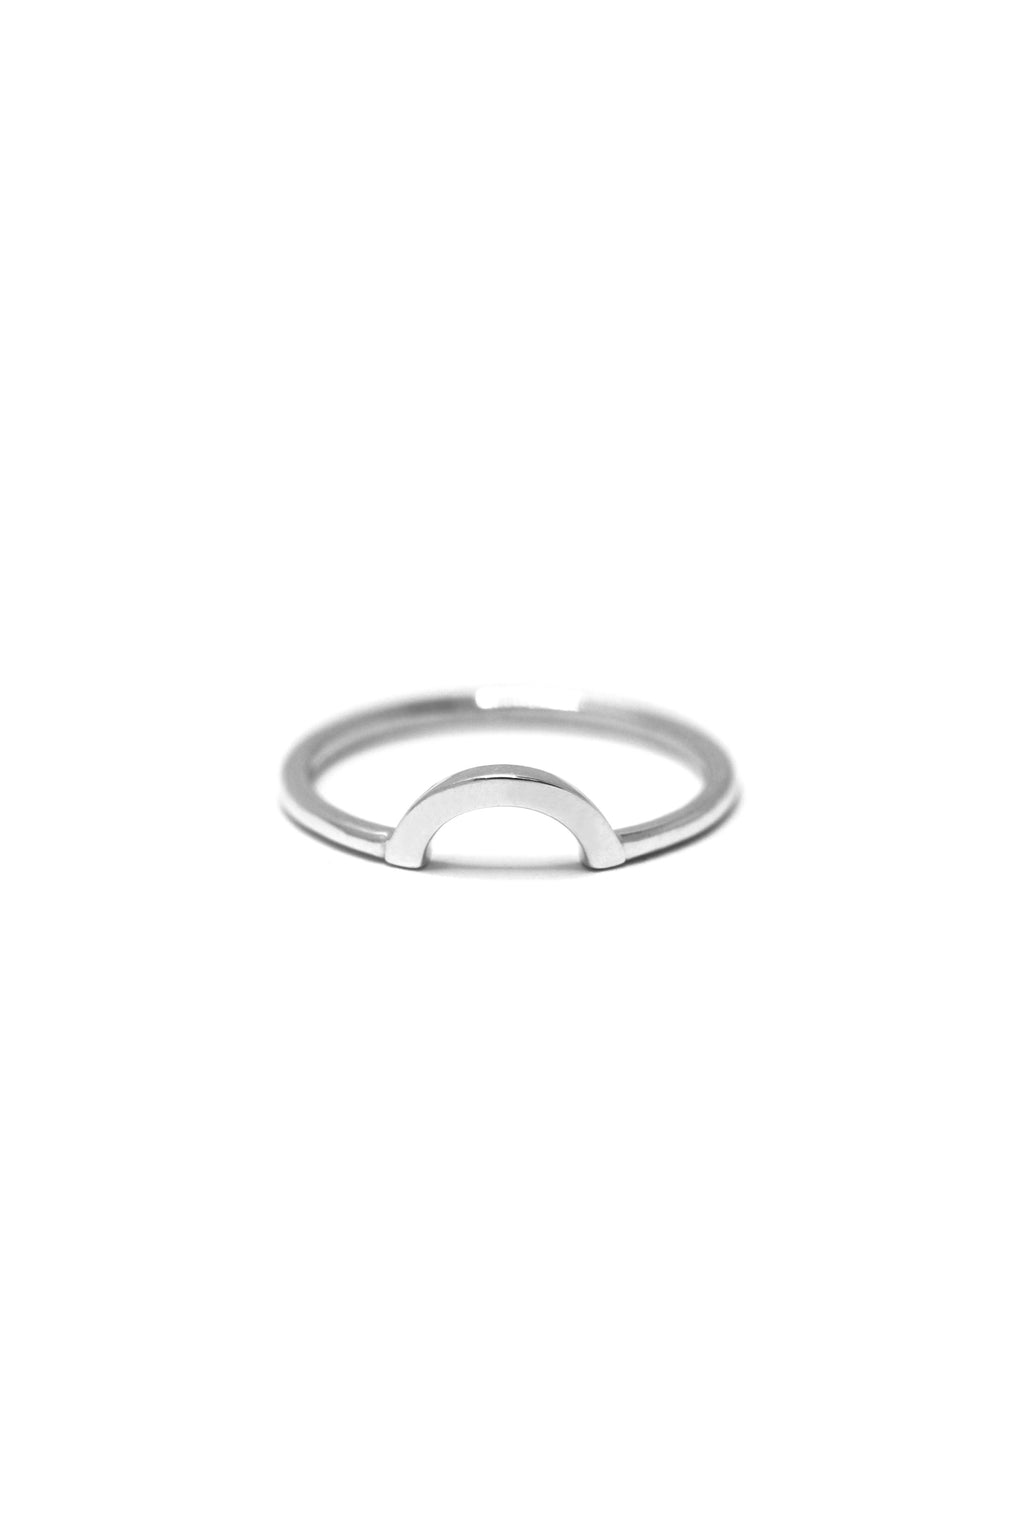 LAST CHANCE // Arc ring // Silver